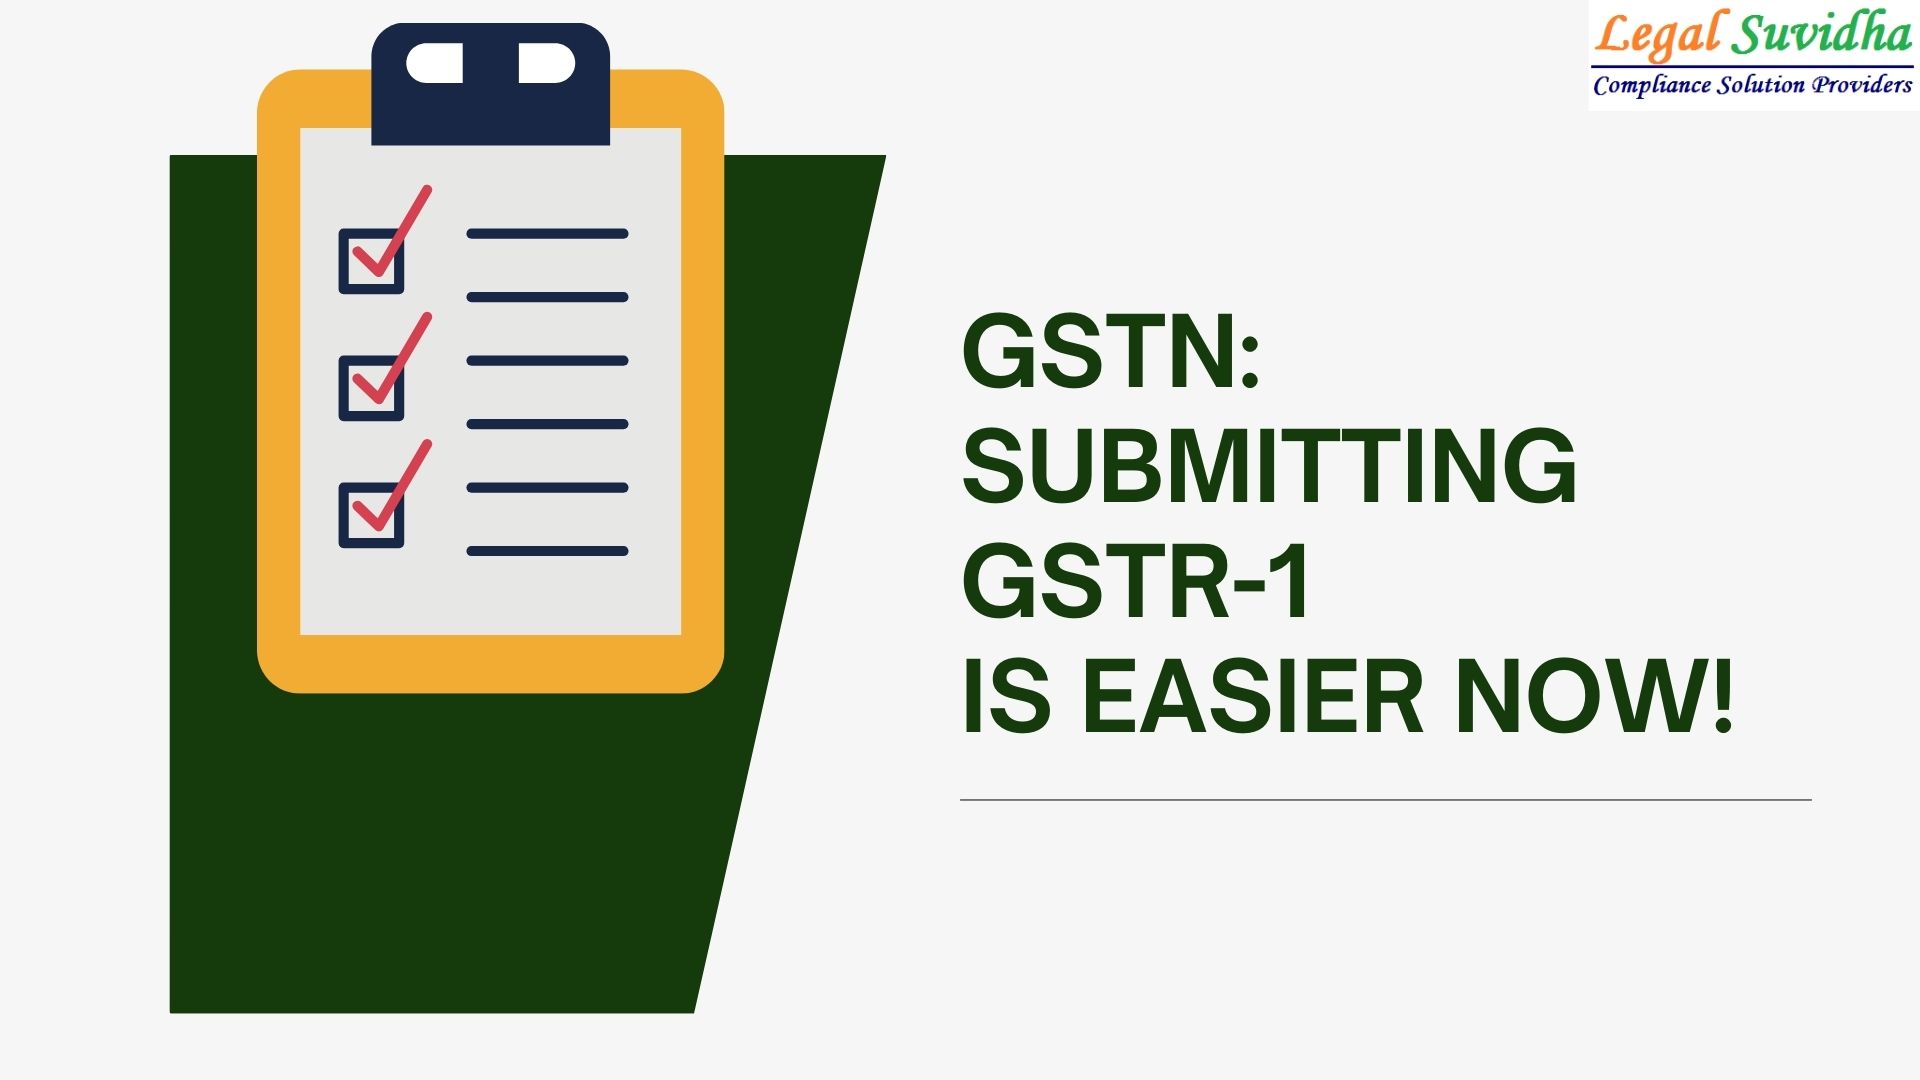 Ease of submitting GSTR-1